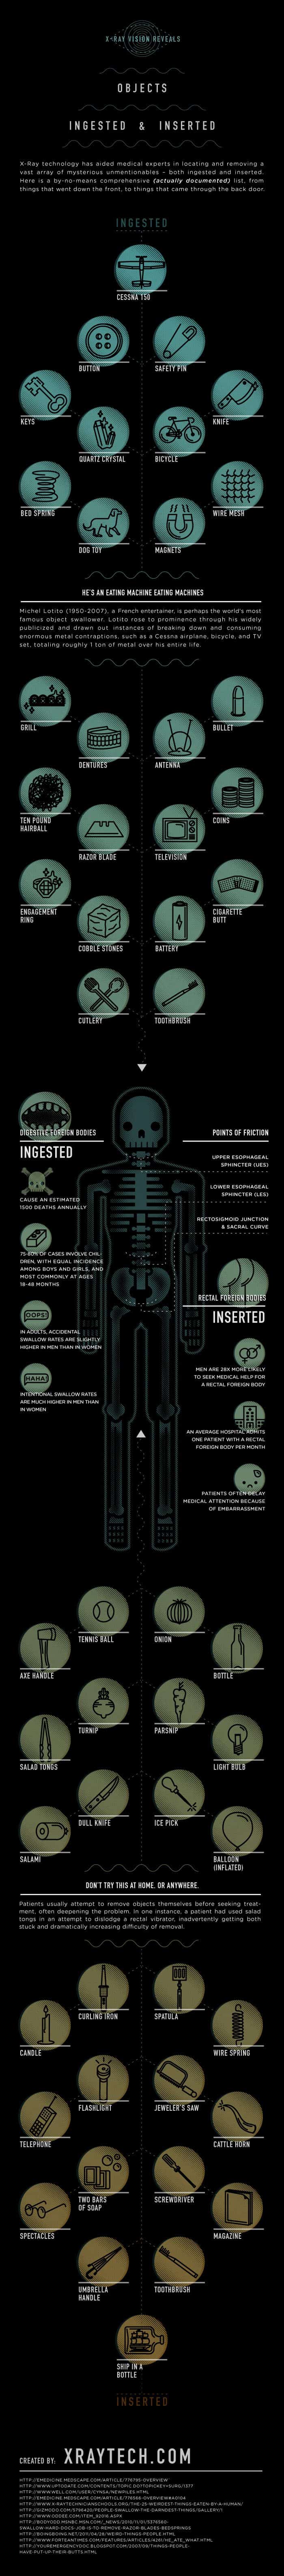 Most Obscure Objects Ingested or Inserted Infographic